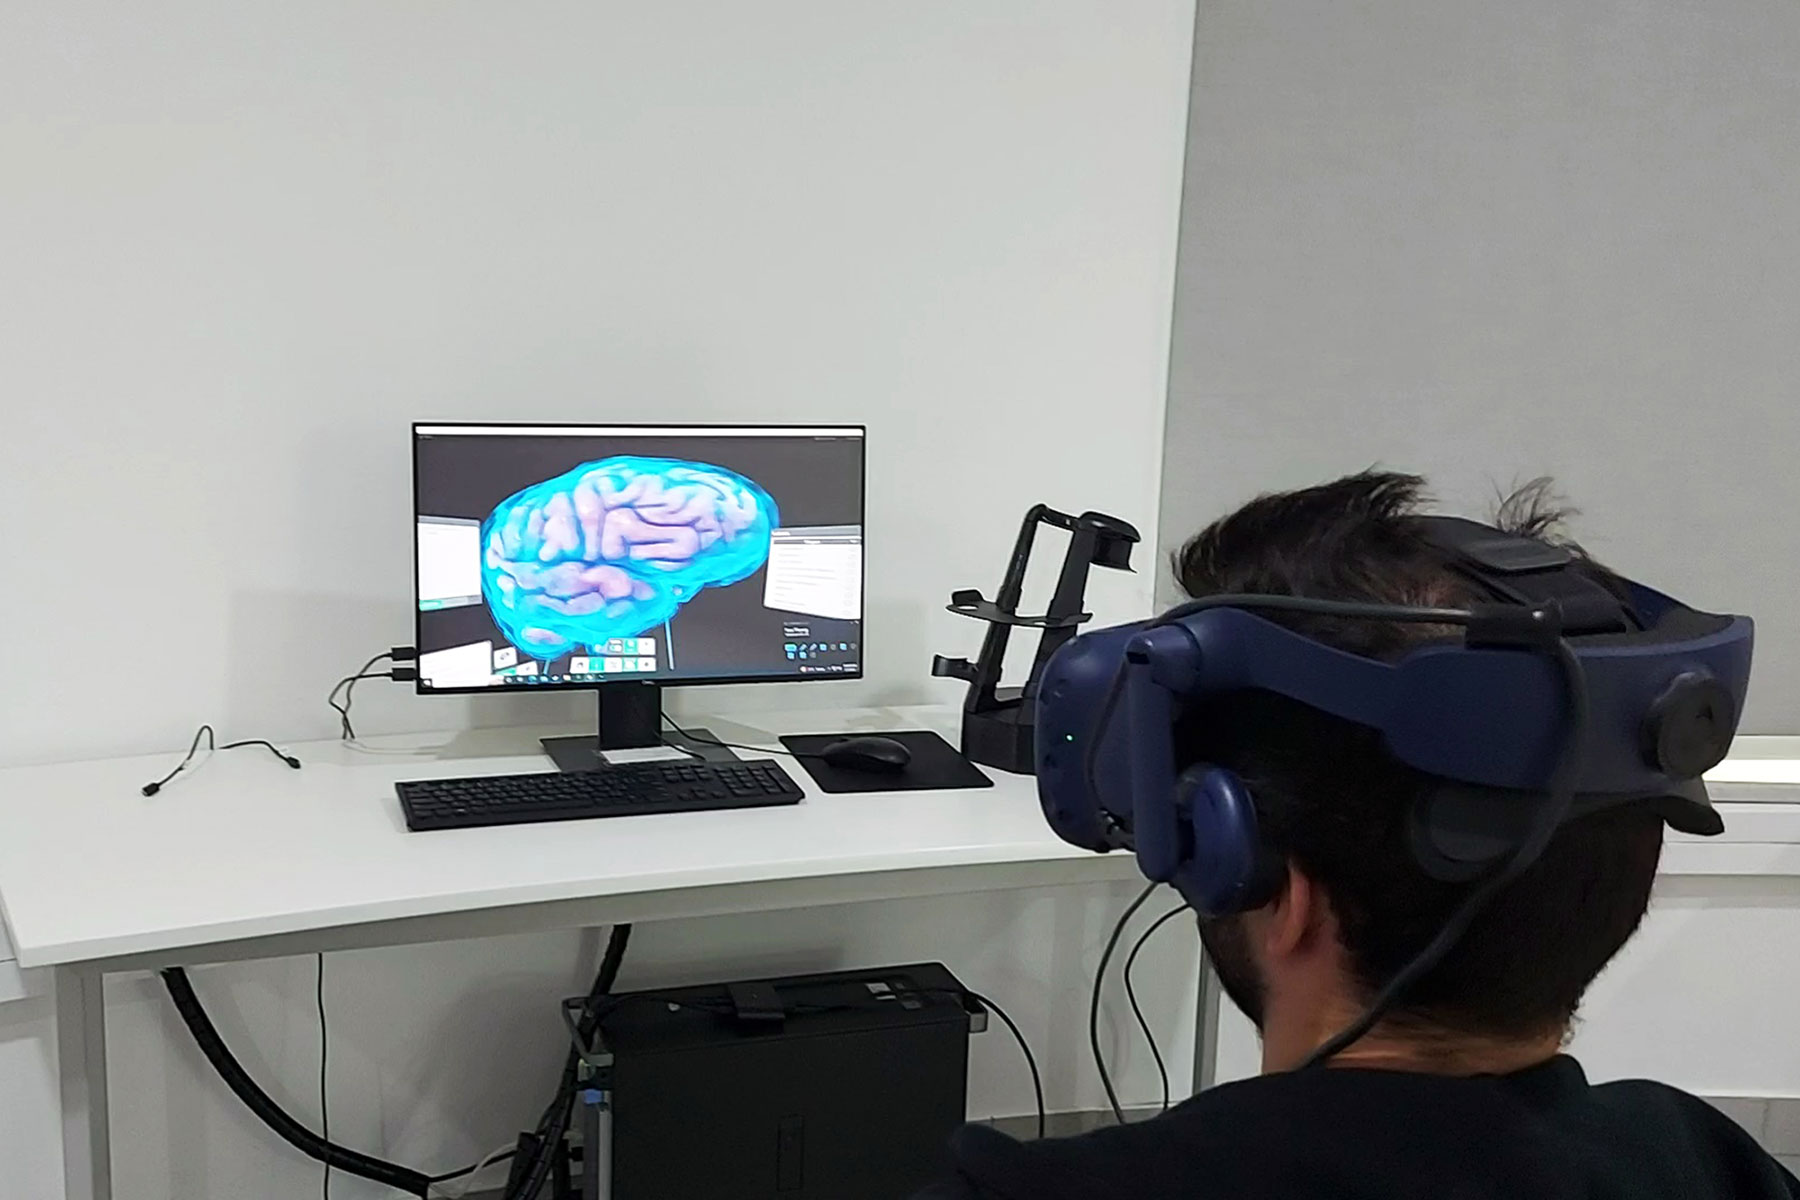 The Department of Biological and Physical Sciences launches the first undergraduate fully-immersive VR laboratory course in the UAE